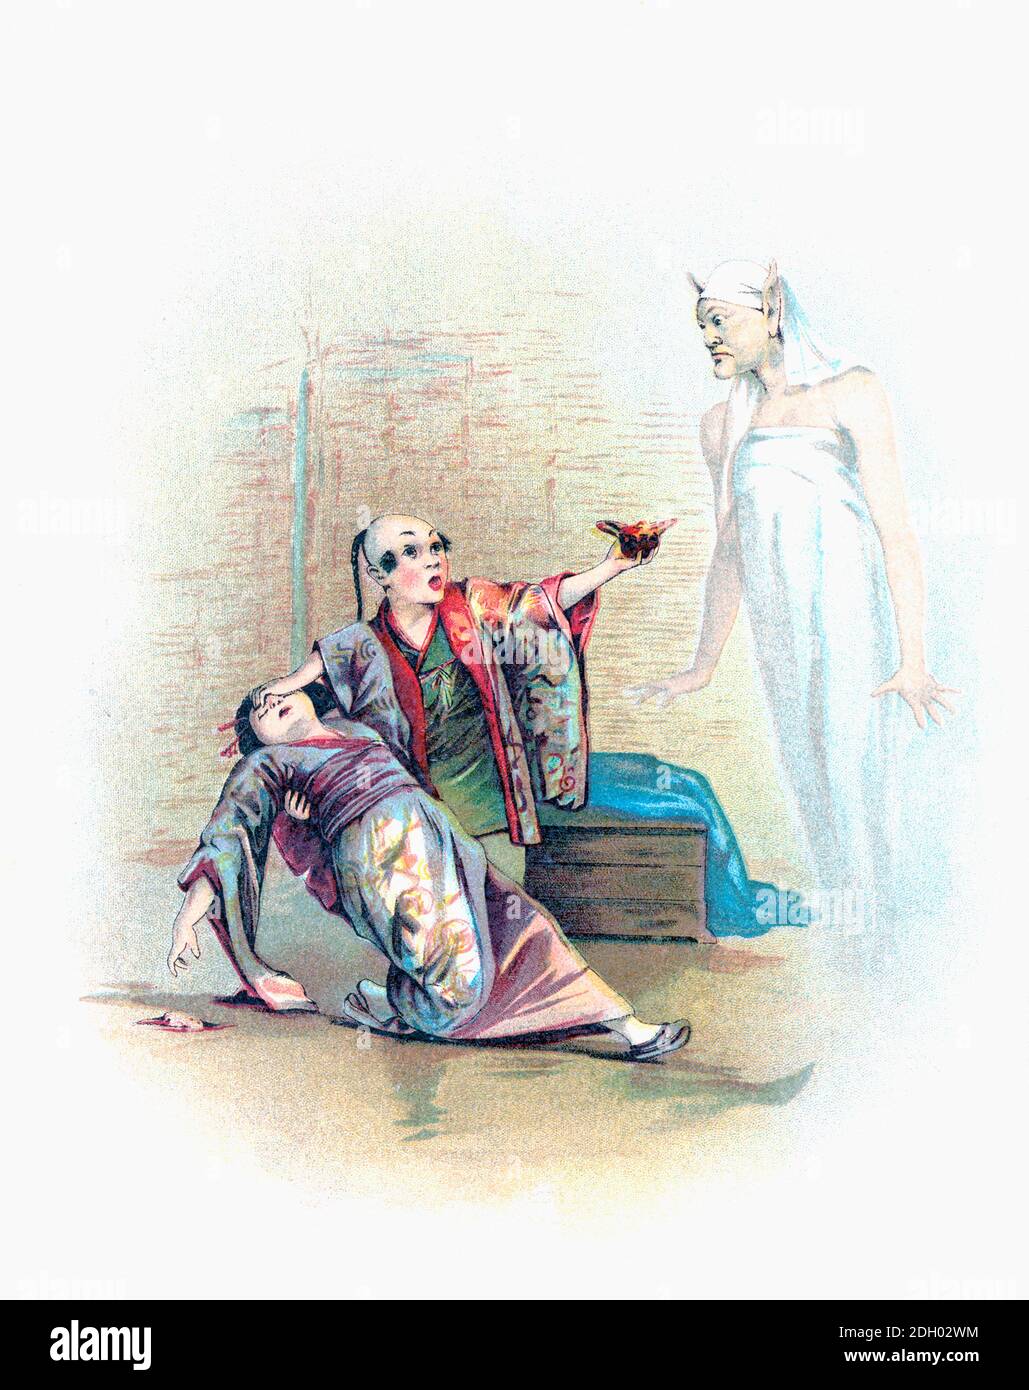 The genie appears from Aladdin’s magic lamp.  After an illustration by Francis Brundage in an 1898 edition of The Arabian Nights Entertainments. Stock Photo